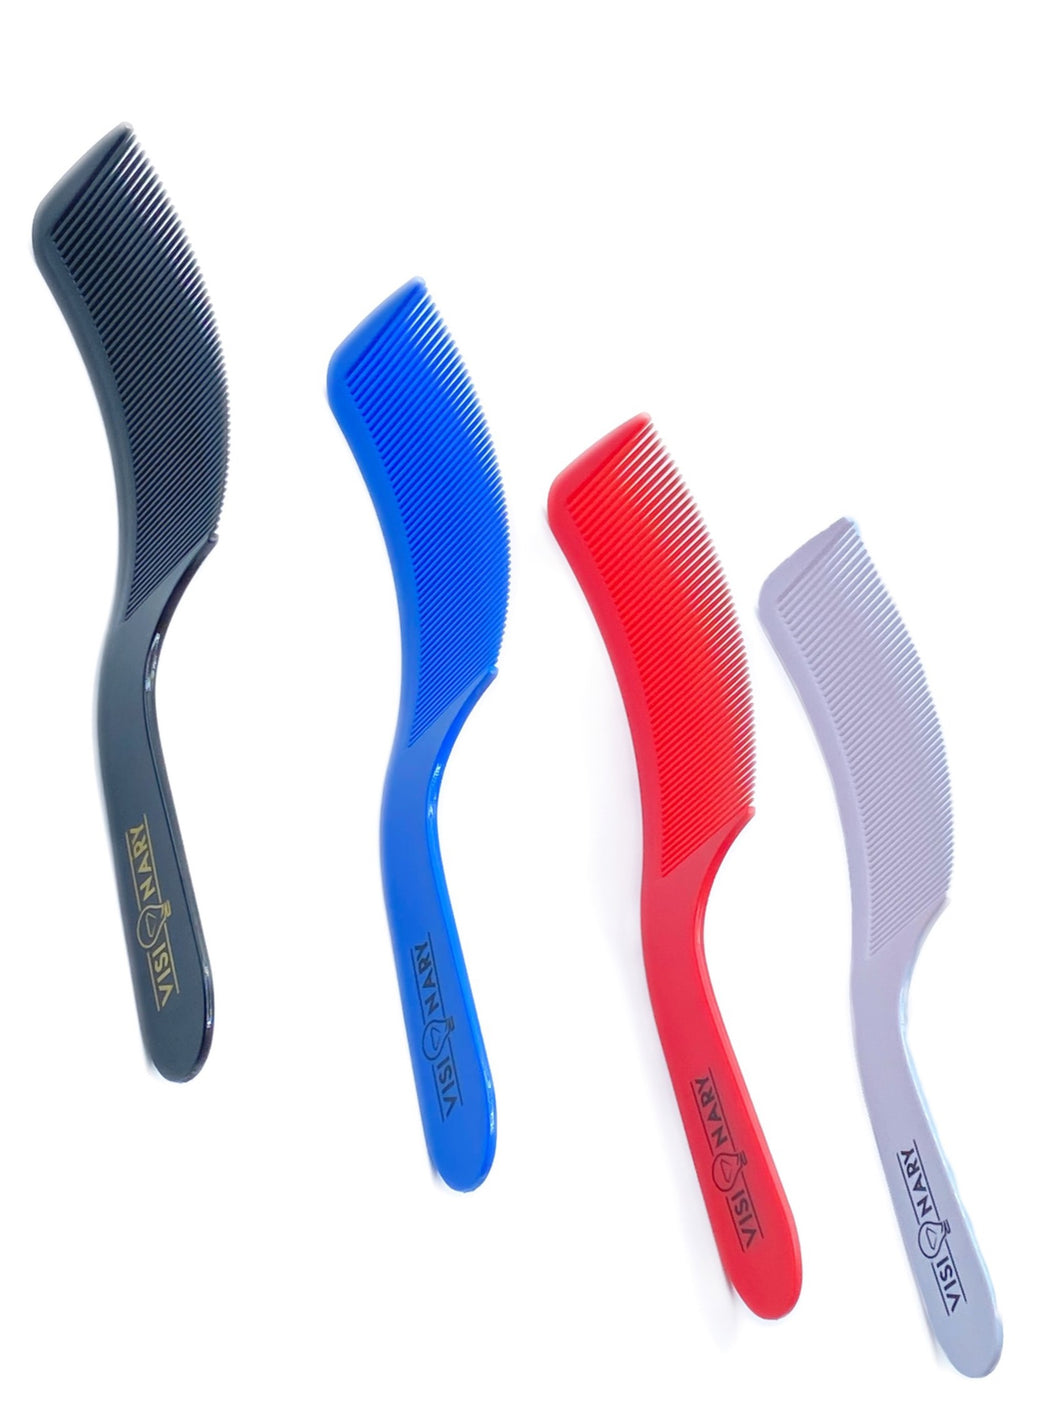 Curved Clipper Over Comb Now Available !